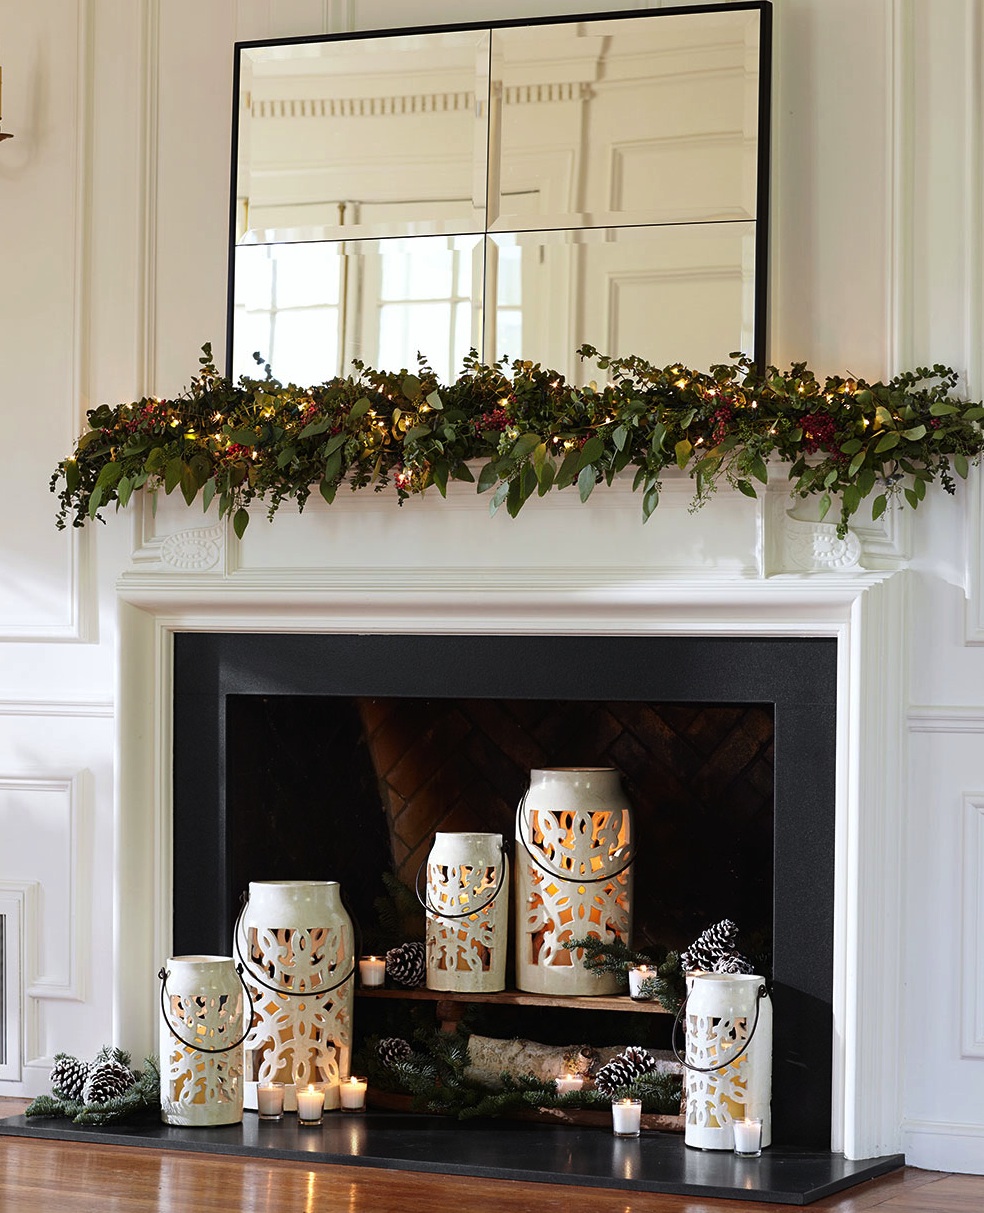 Professional Tips for Decorating Your Holiday Mantel 